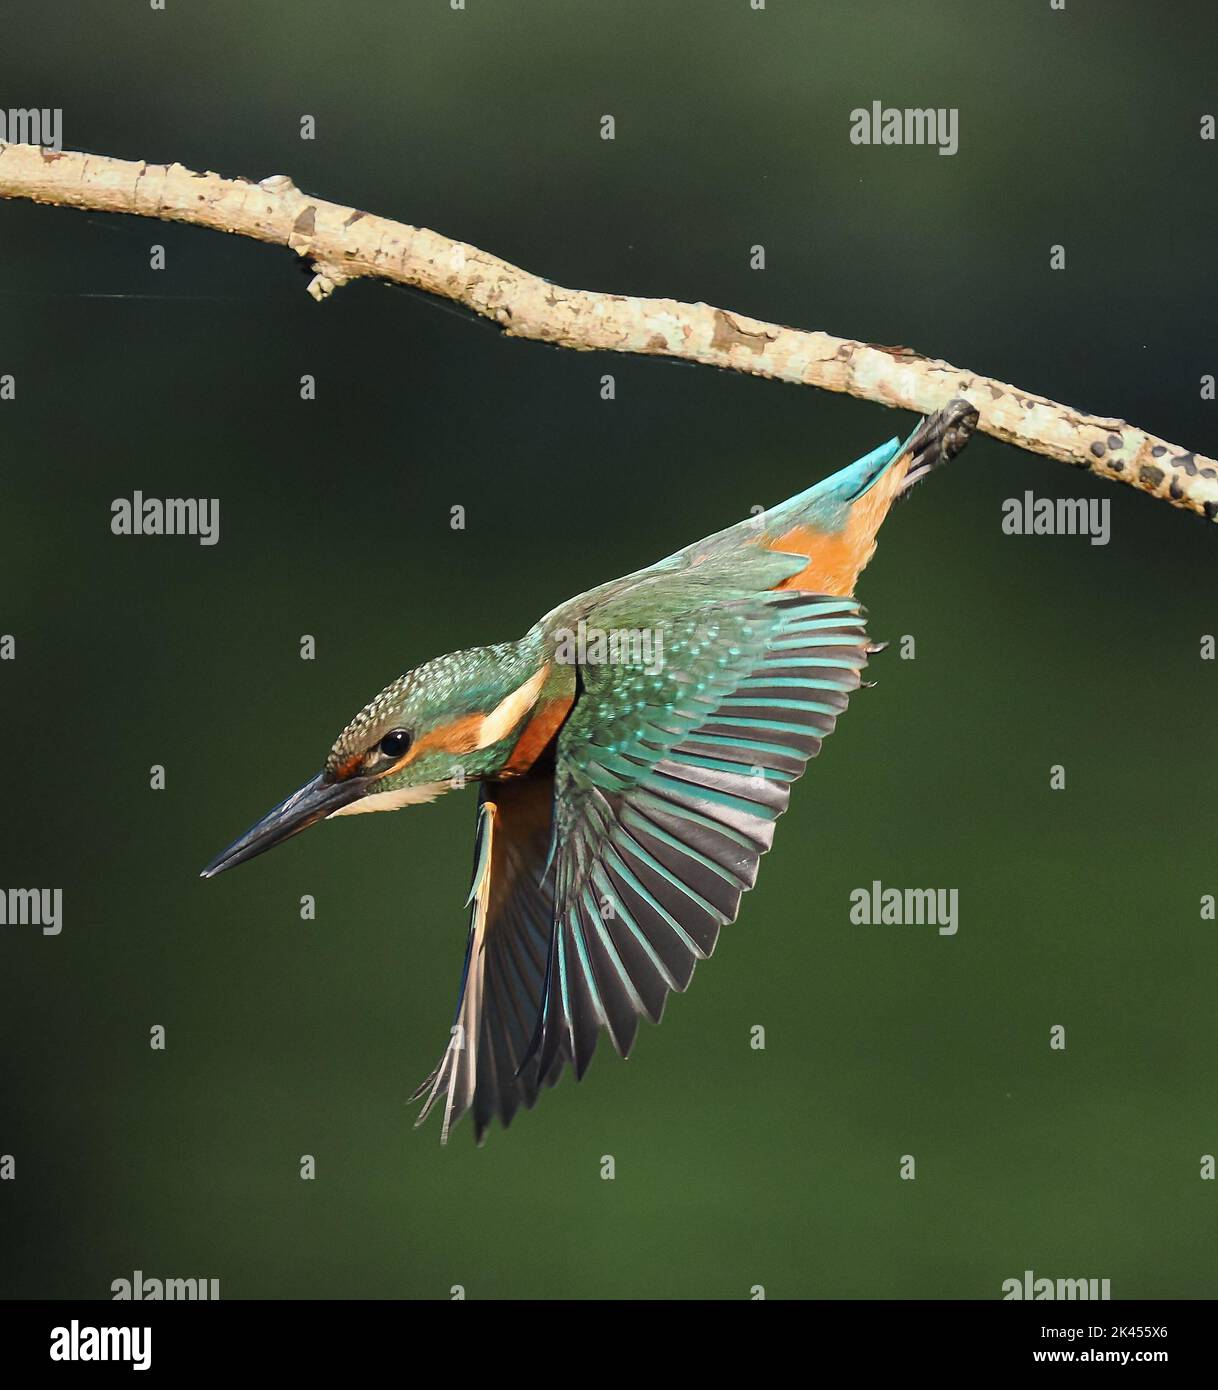 Kingfisher, diving for aquatic prey from a perch. Stock Photo